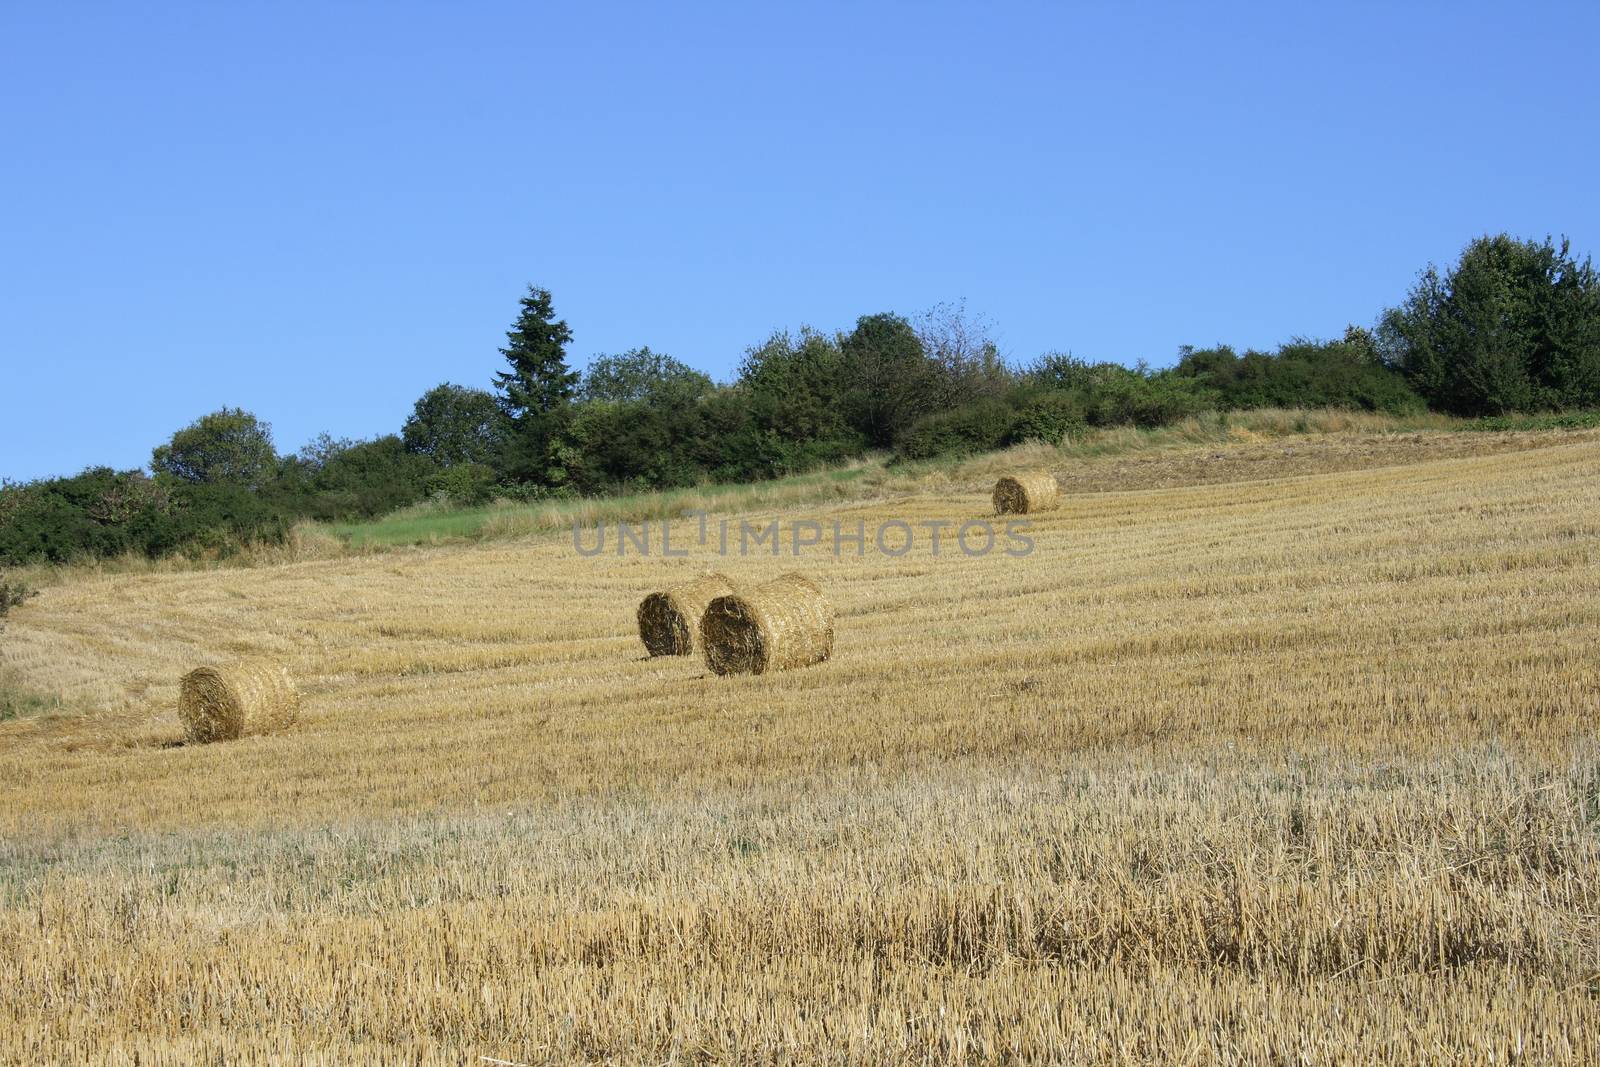 A Harvested grain field with straw rolls, forest in the background